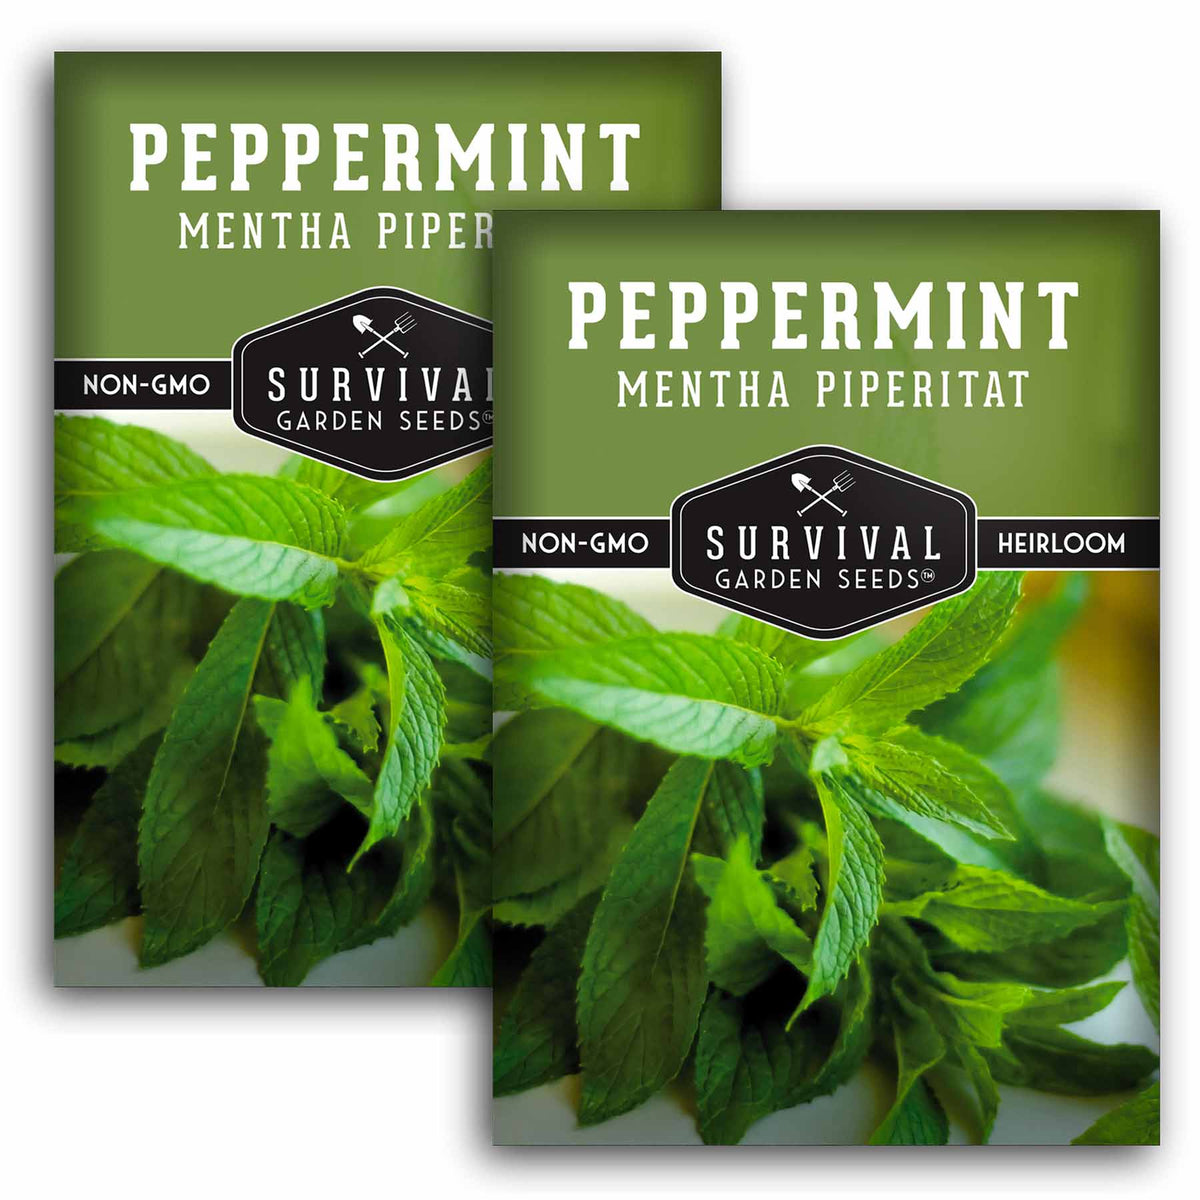 2 packets of peppermint seeds